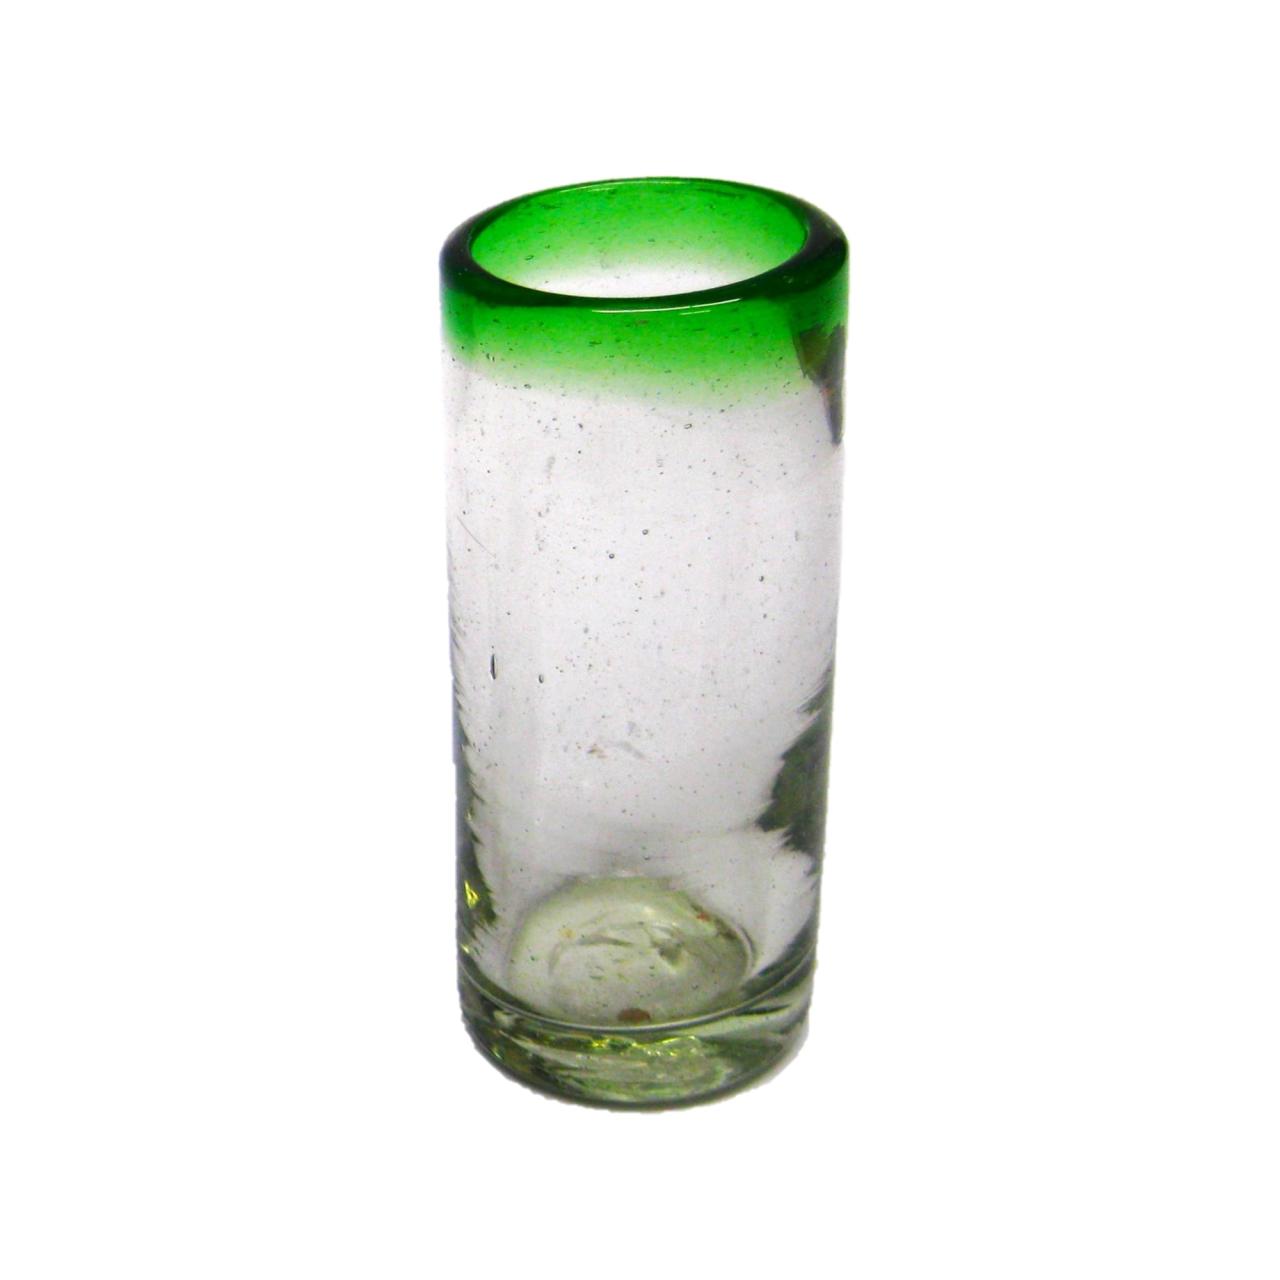 Wholesale MEXICAN GLASSWARE / Emerald Green Rim 2 oz Tequila Shot Glasses  / These shot glasses bordered in emerald green are perfect for sipping your favourite tequila or any other liquor.